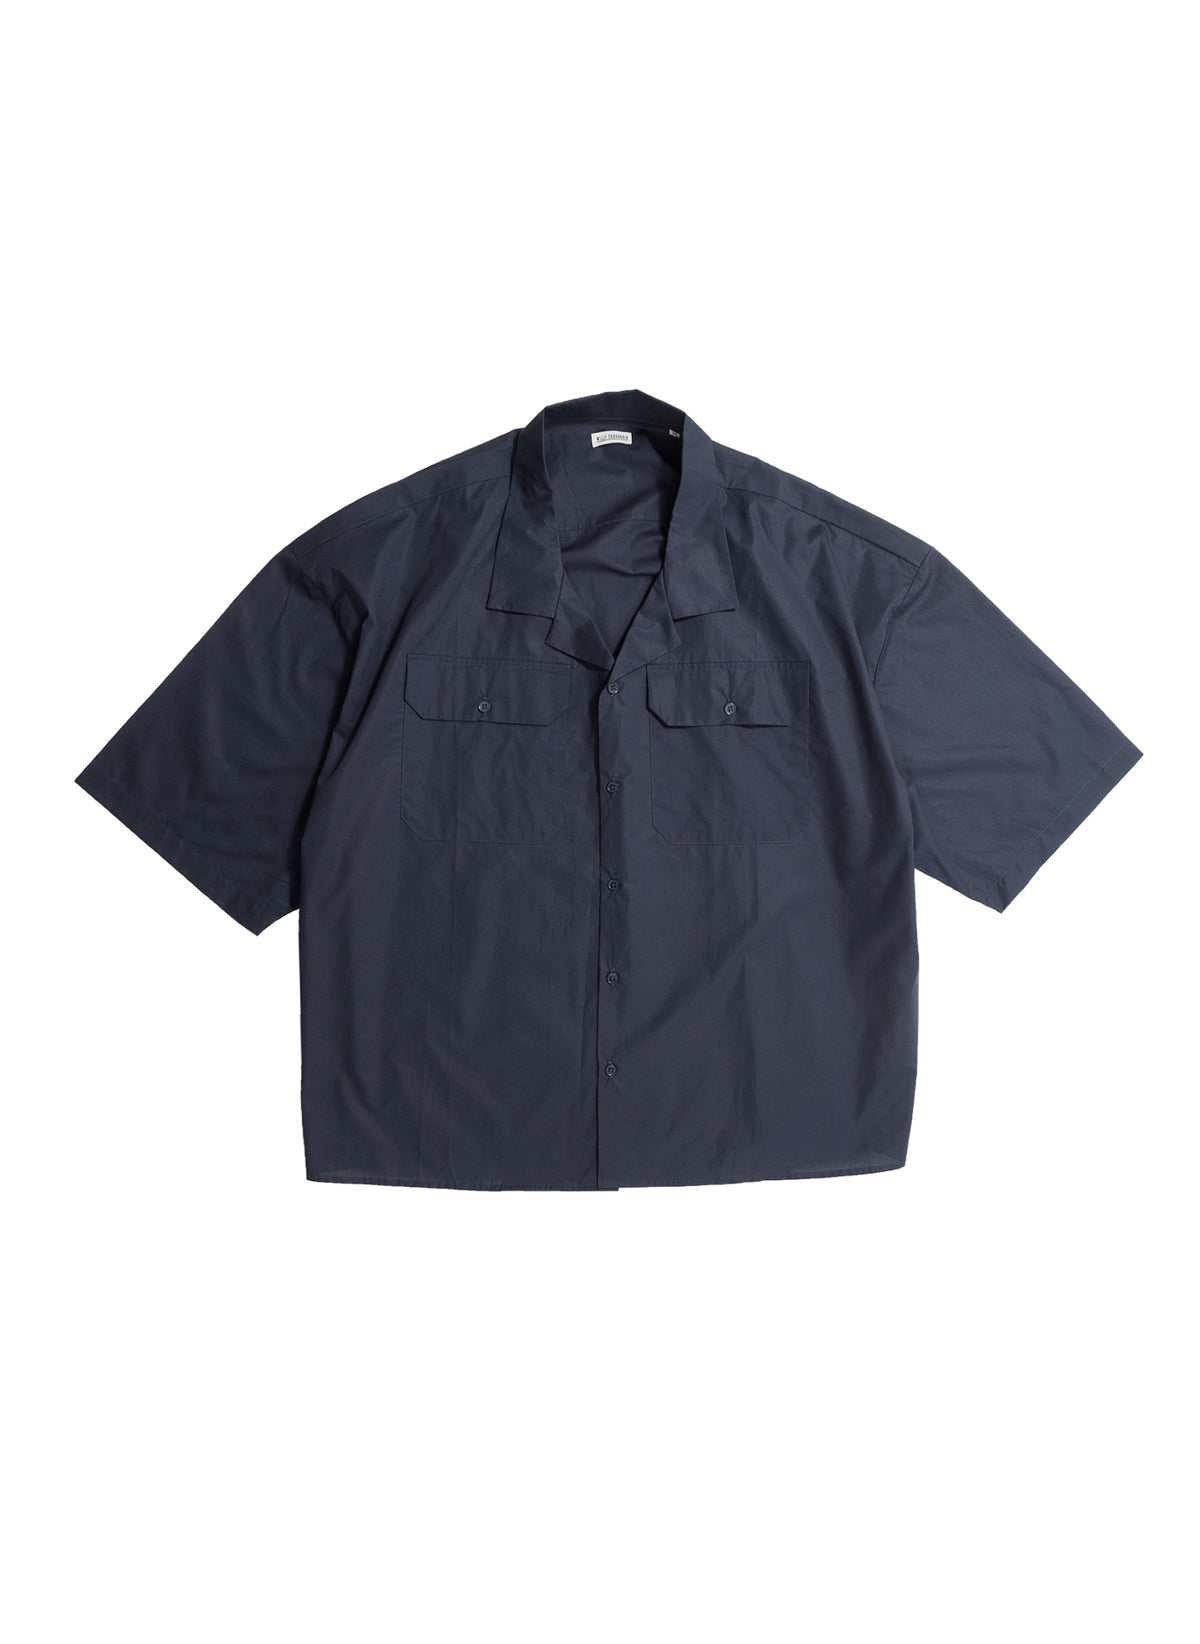 WILLY CHAVARRIA / WEST STREET SHIRT NAVY BASE